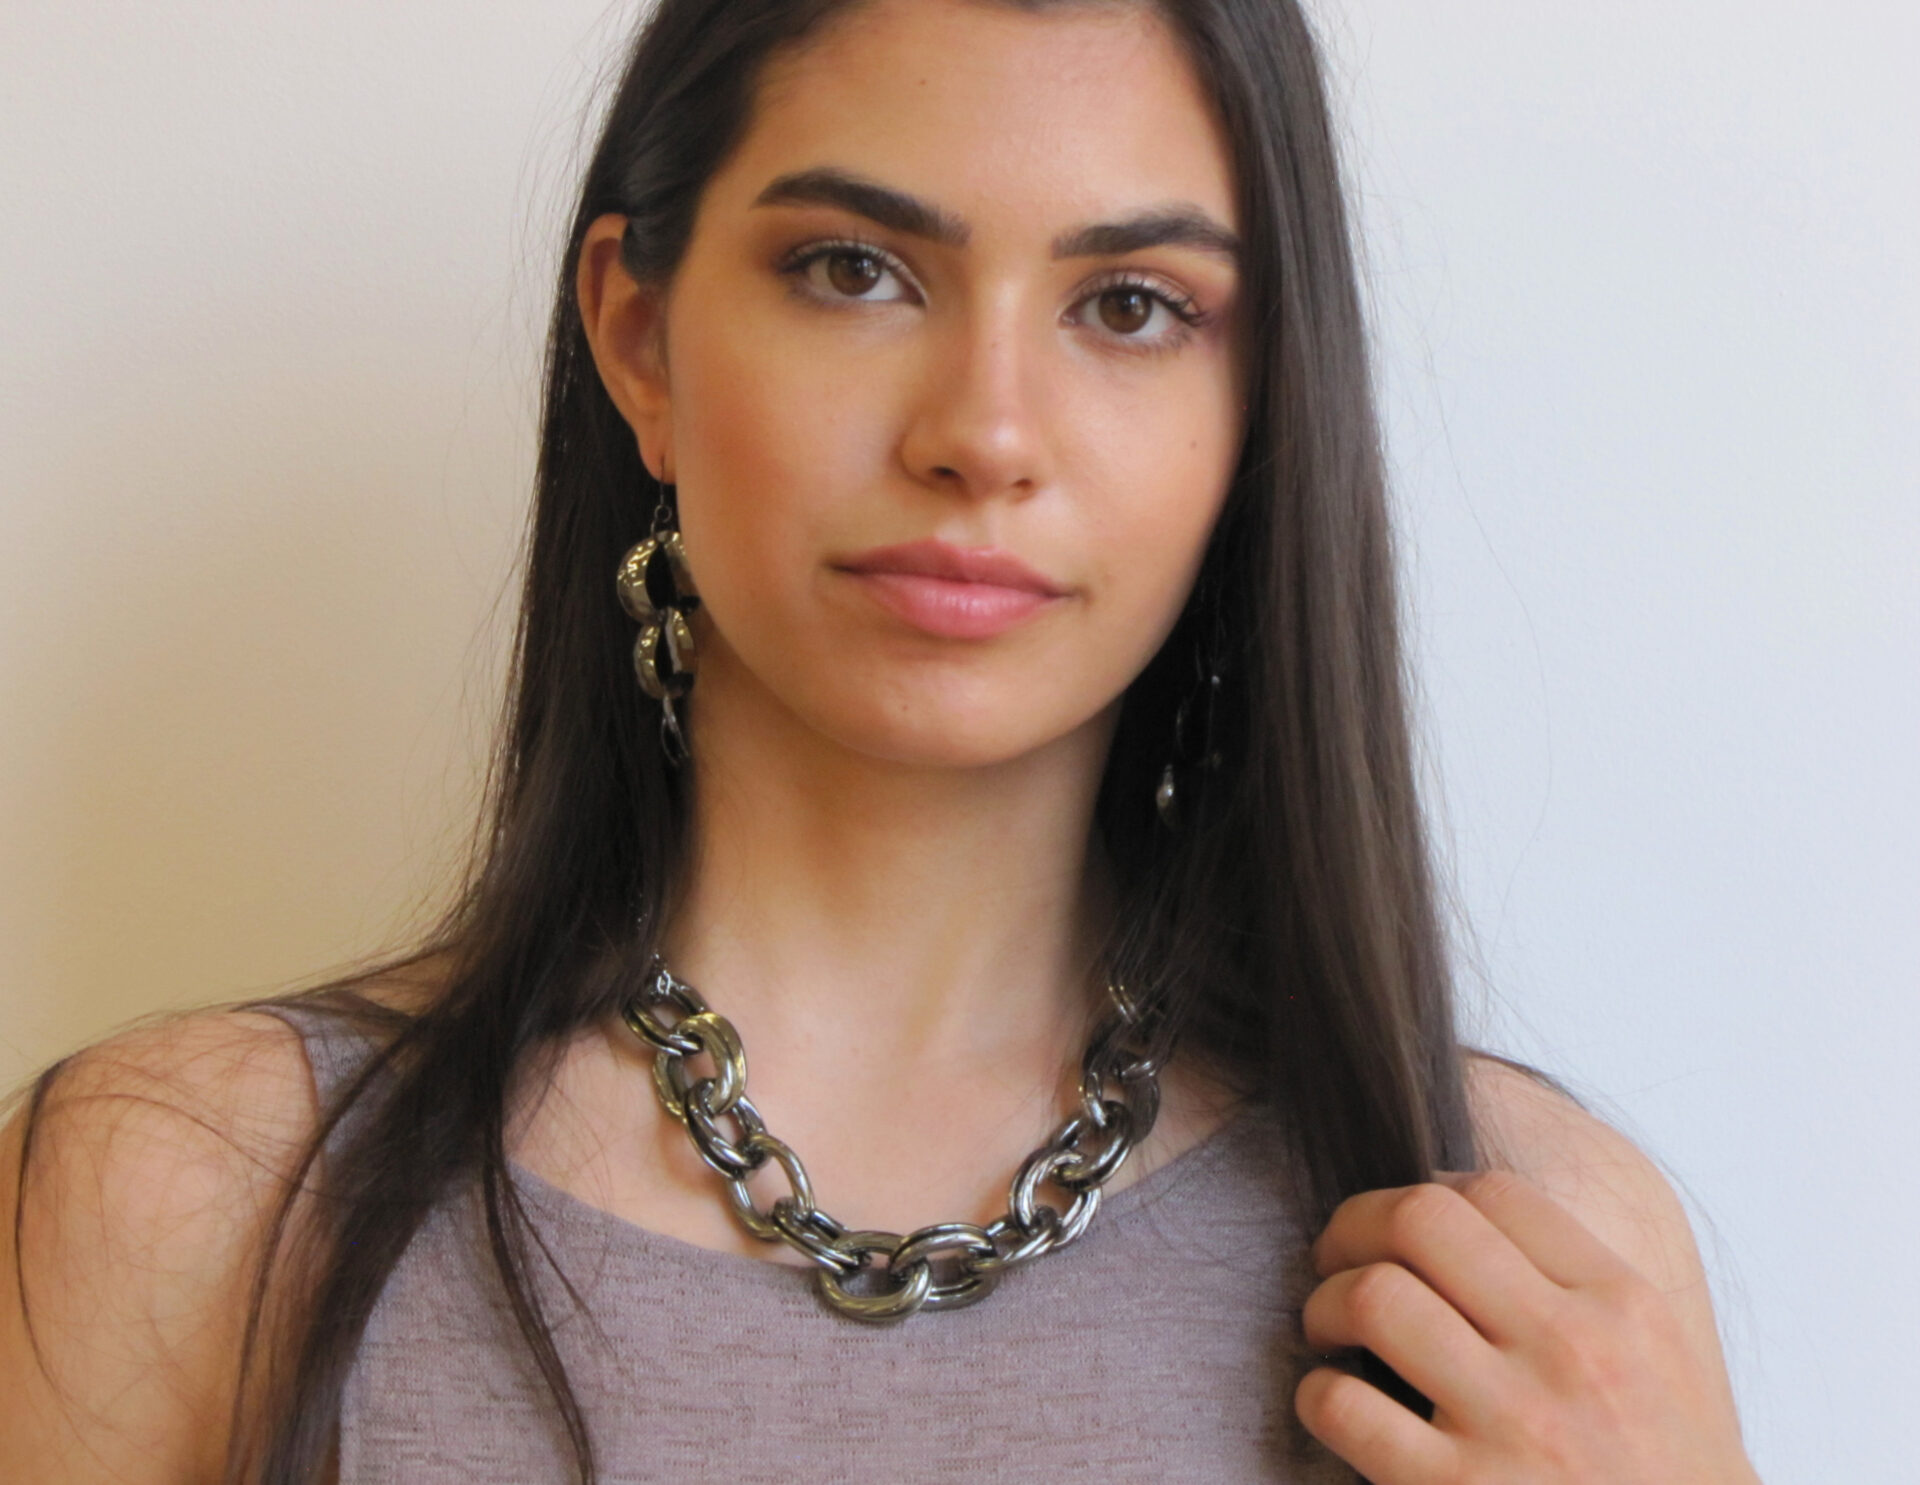 A woman in grey tops wearing a necklace